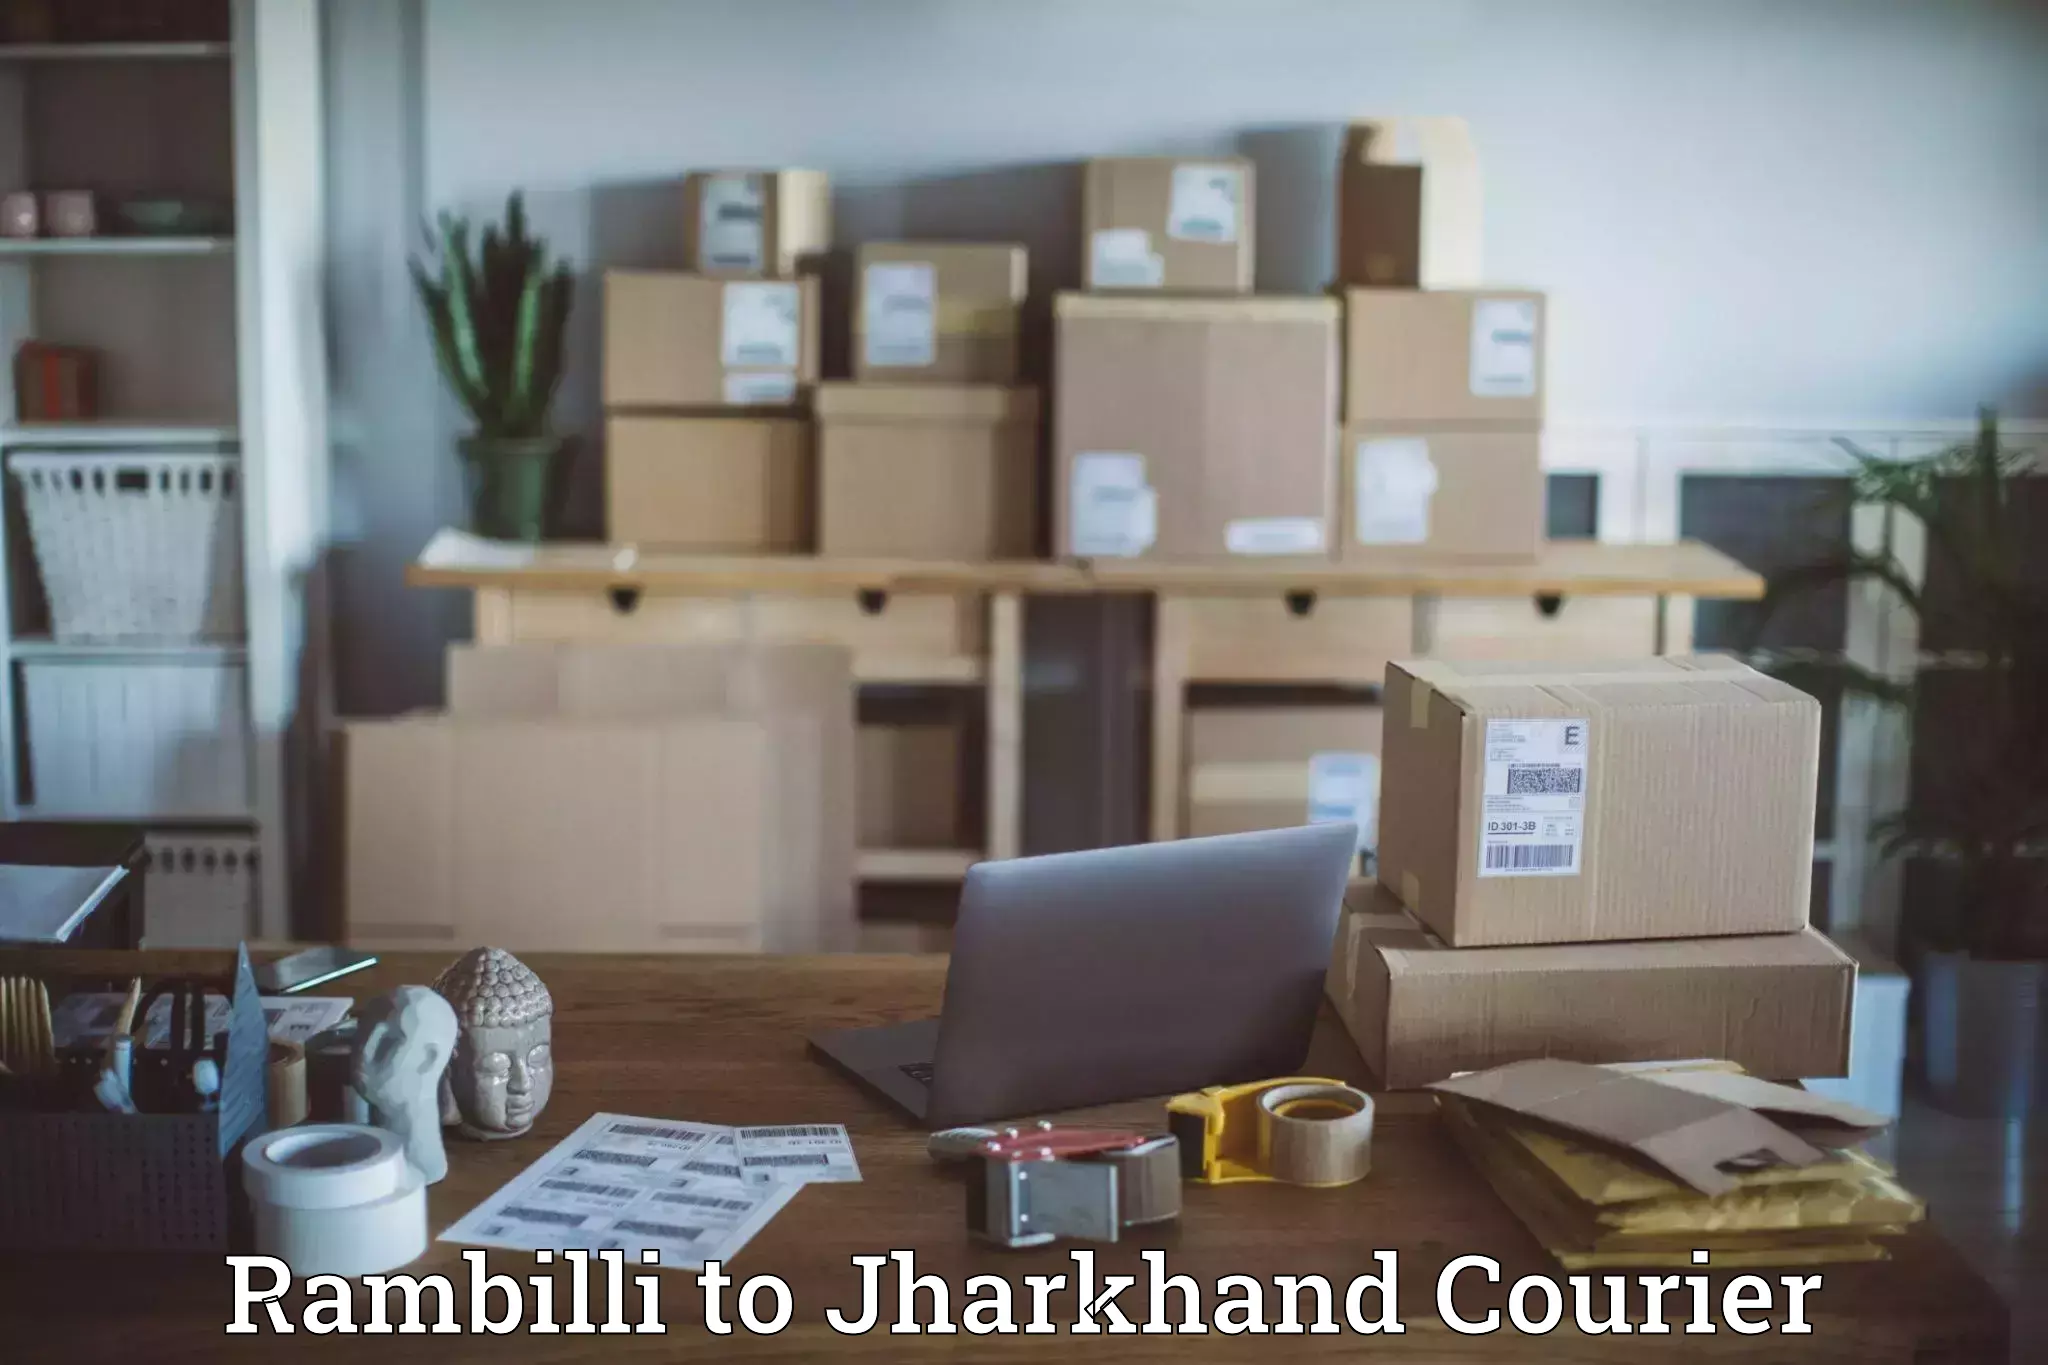 Courier service partnerships Rambilli to Peterbar